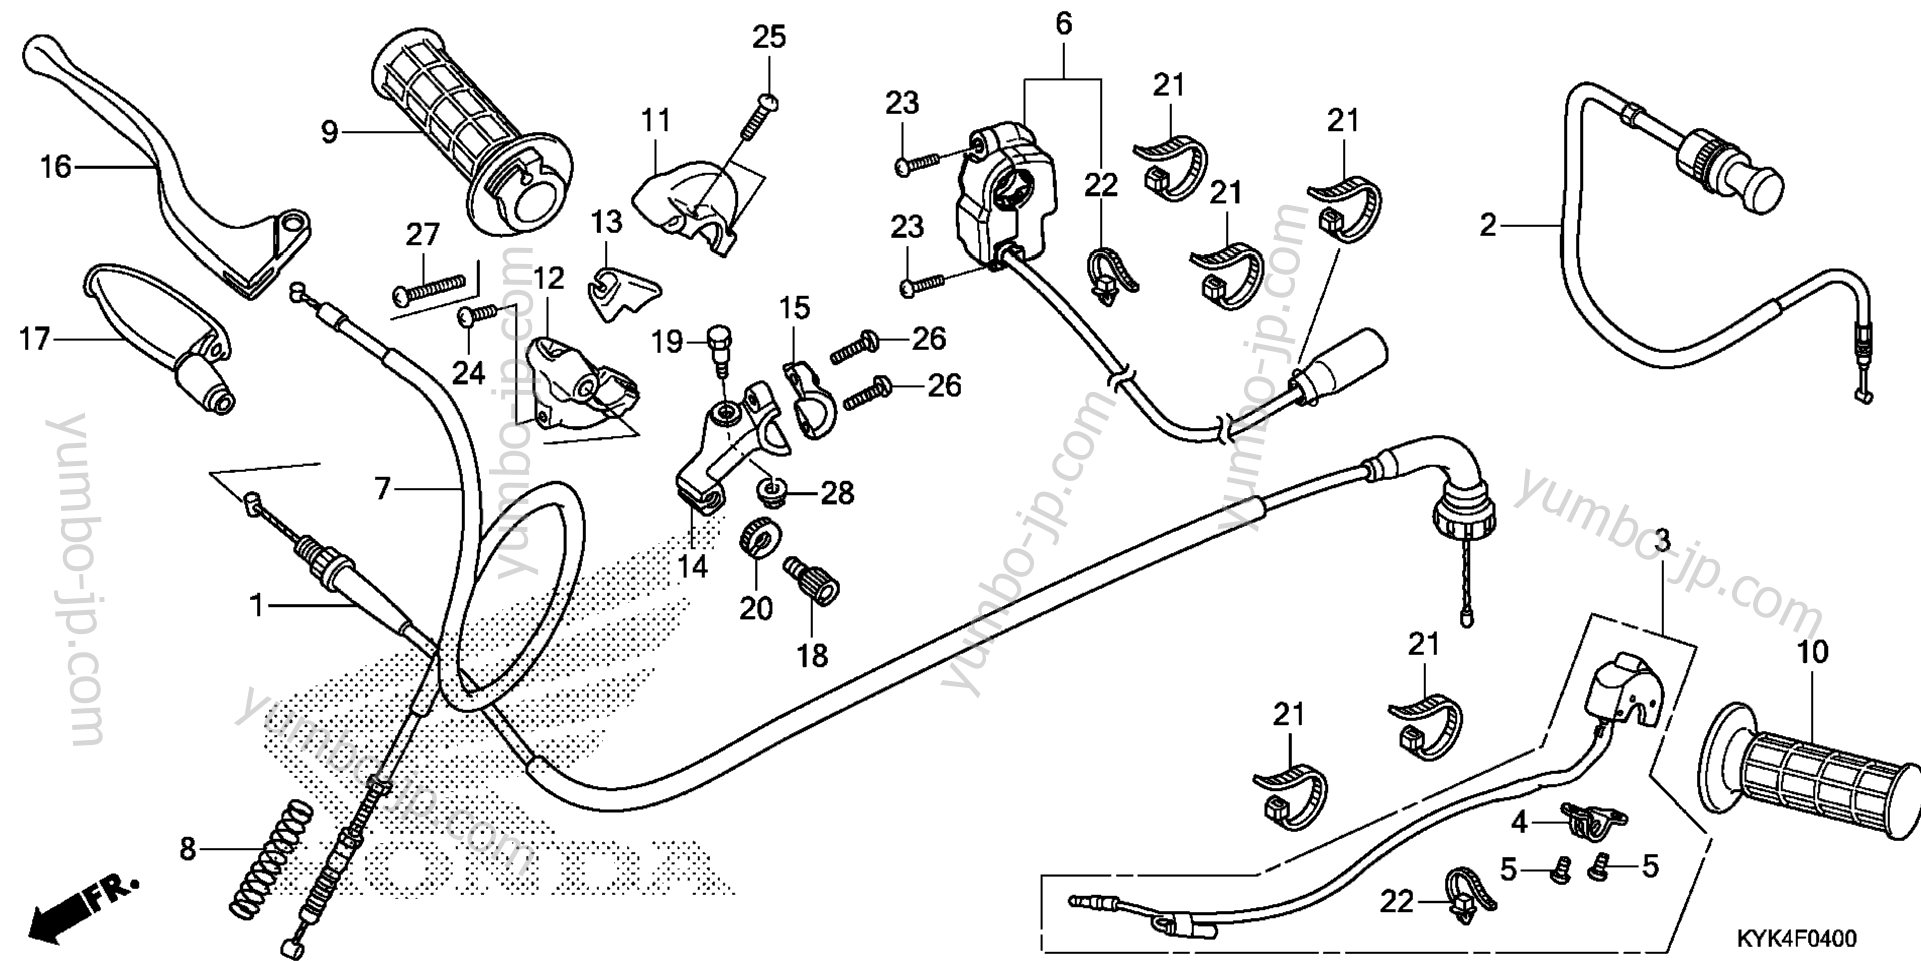 HANDLE LEVER / SWITCH / CABLE for motorcycles HONDA CRF110F AC 2013 year